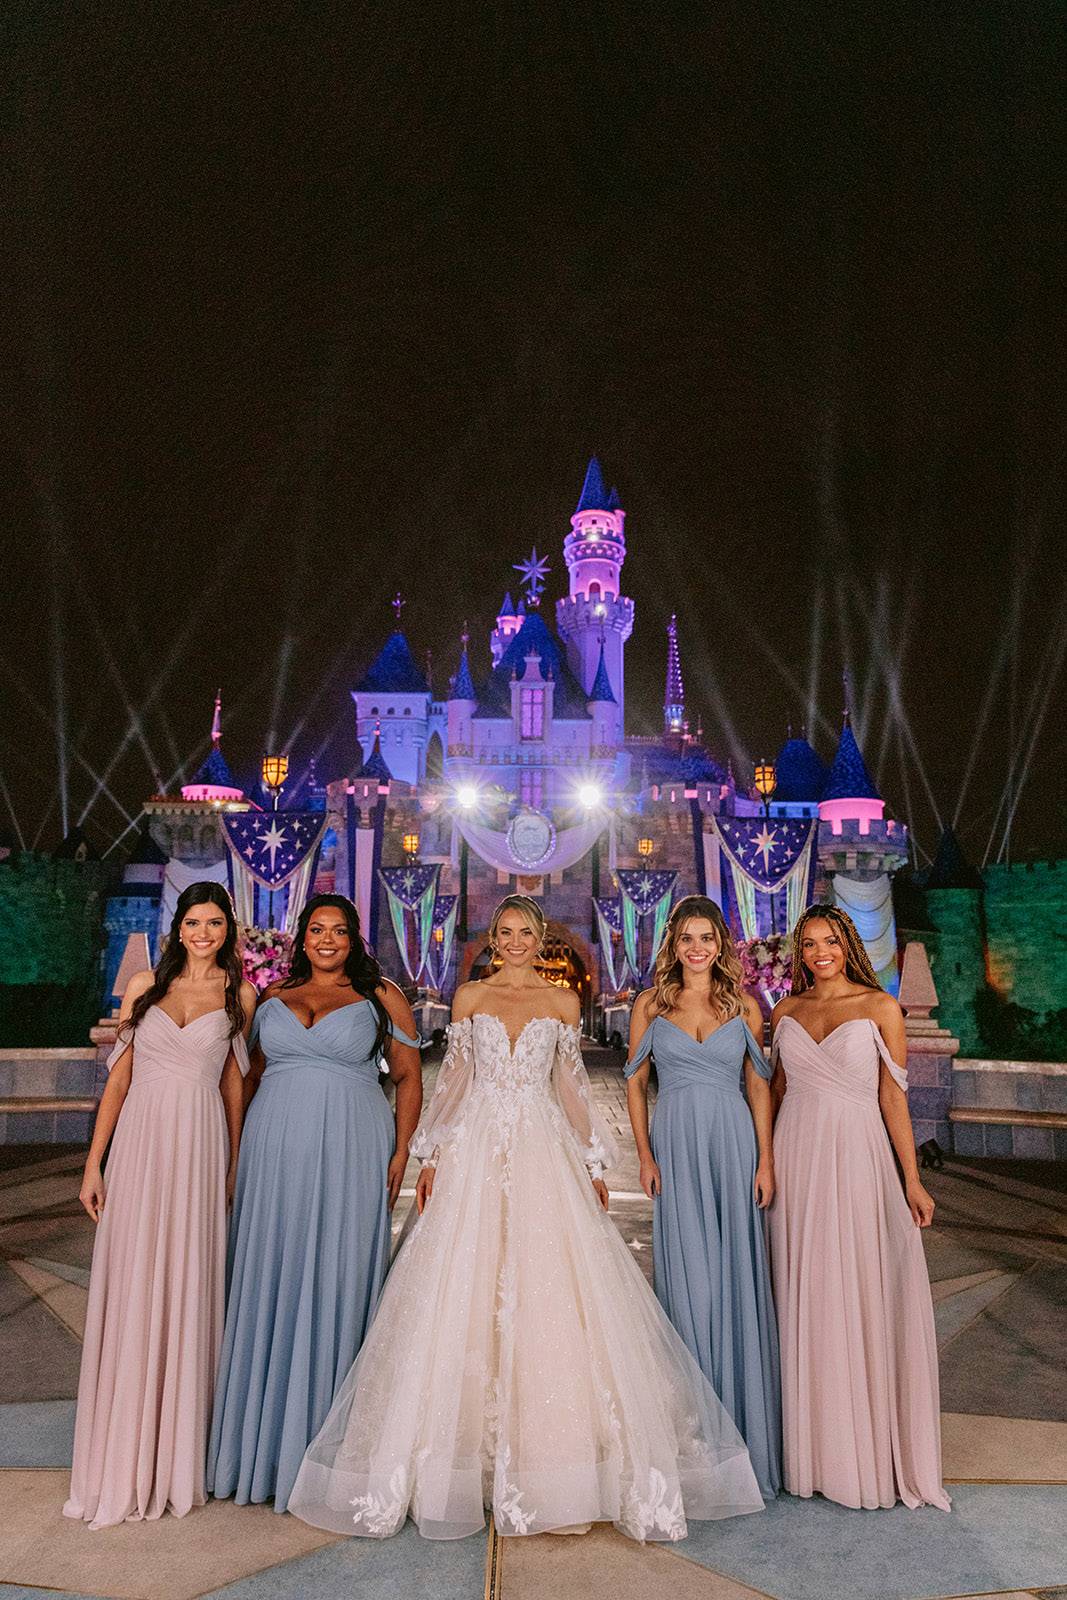 Brand New Disney Princess-Inspired Wedding Gowns Unveiled During